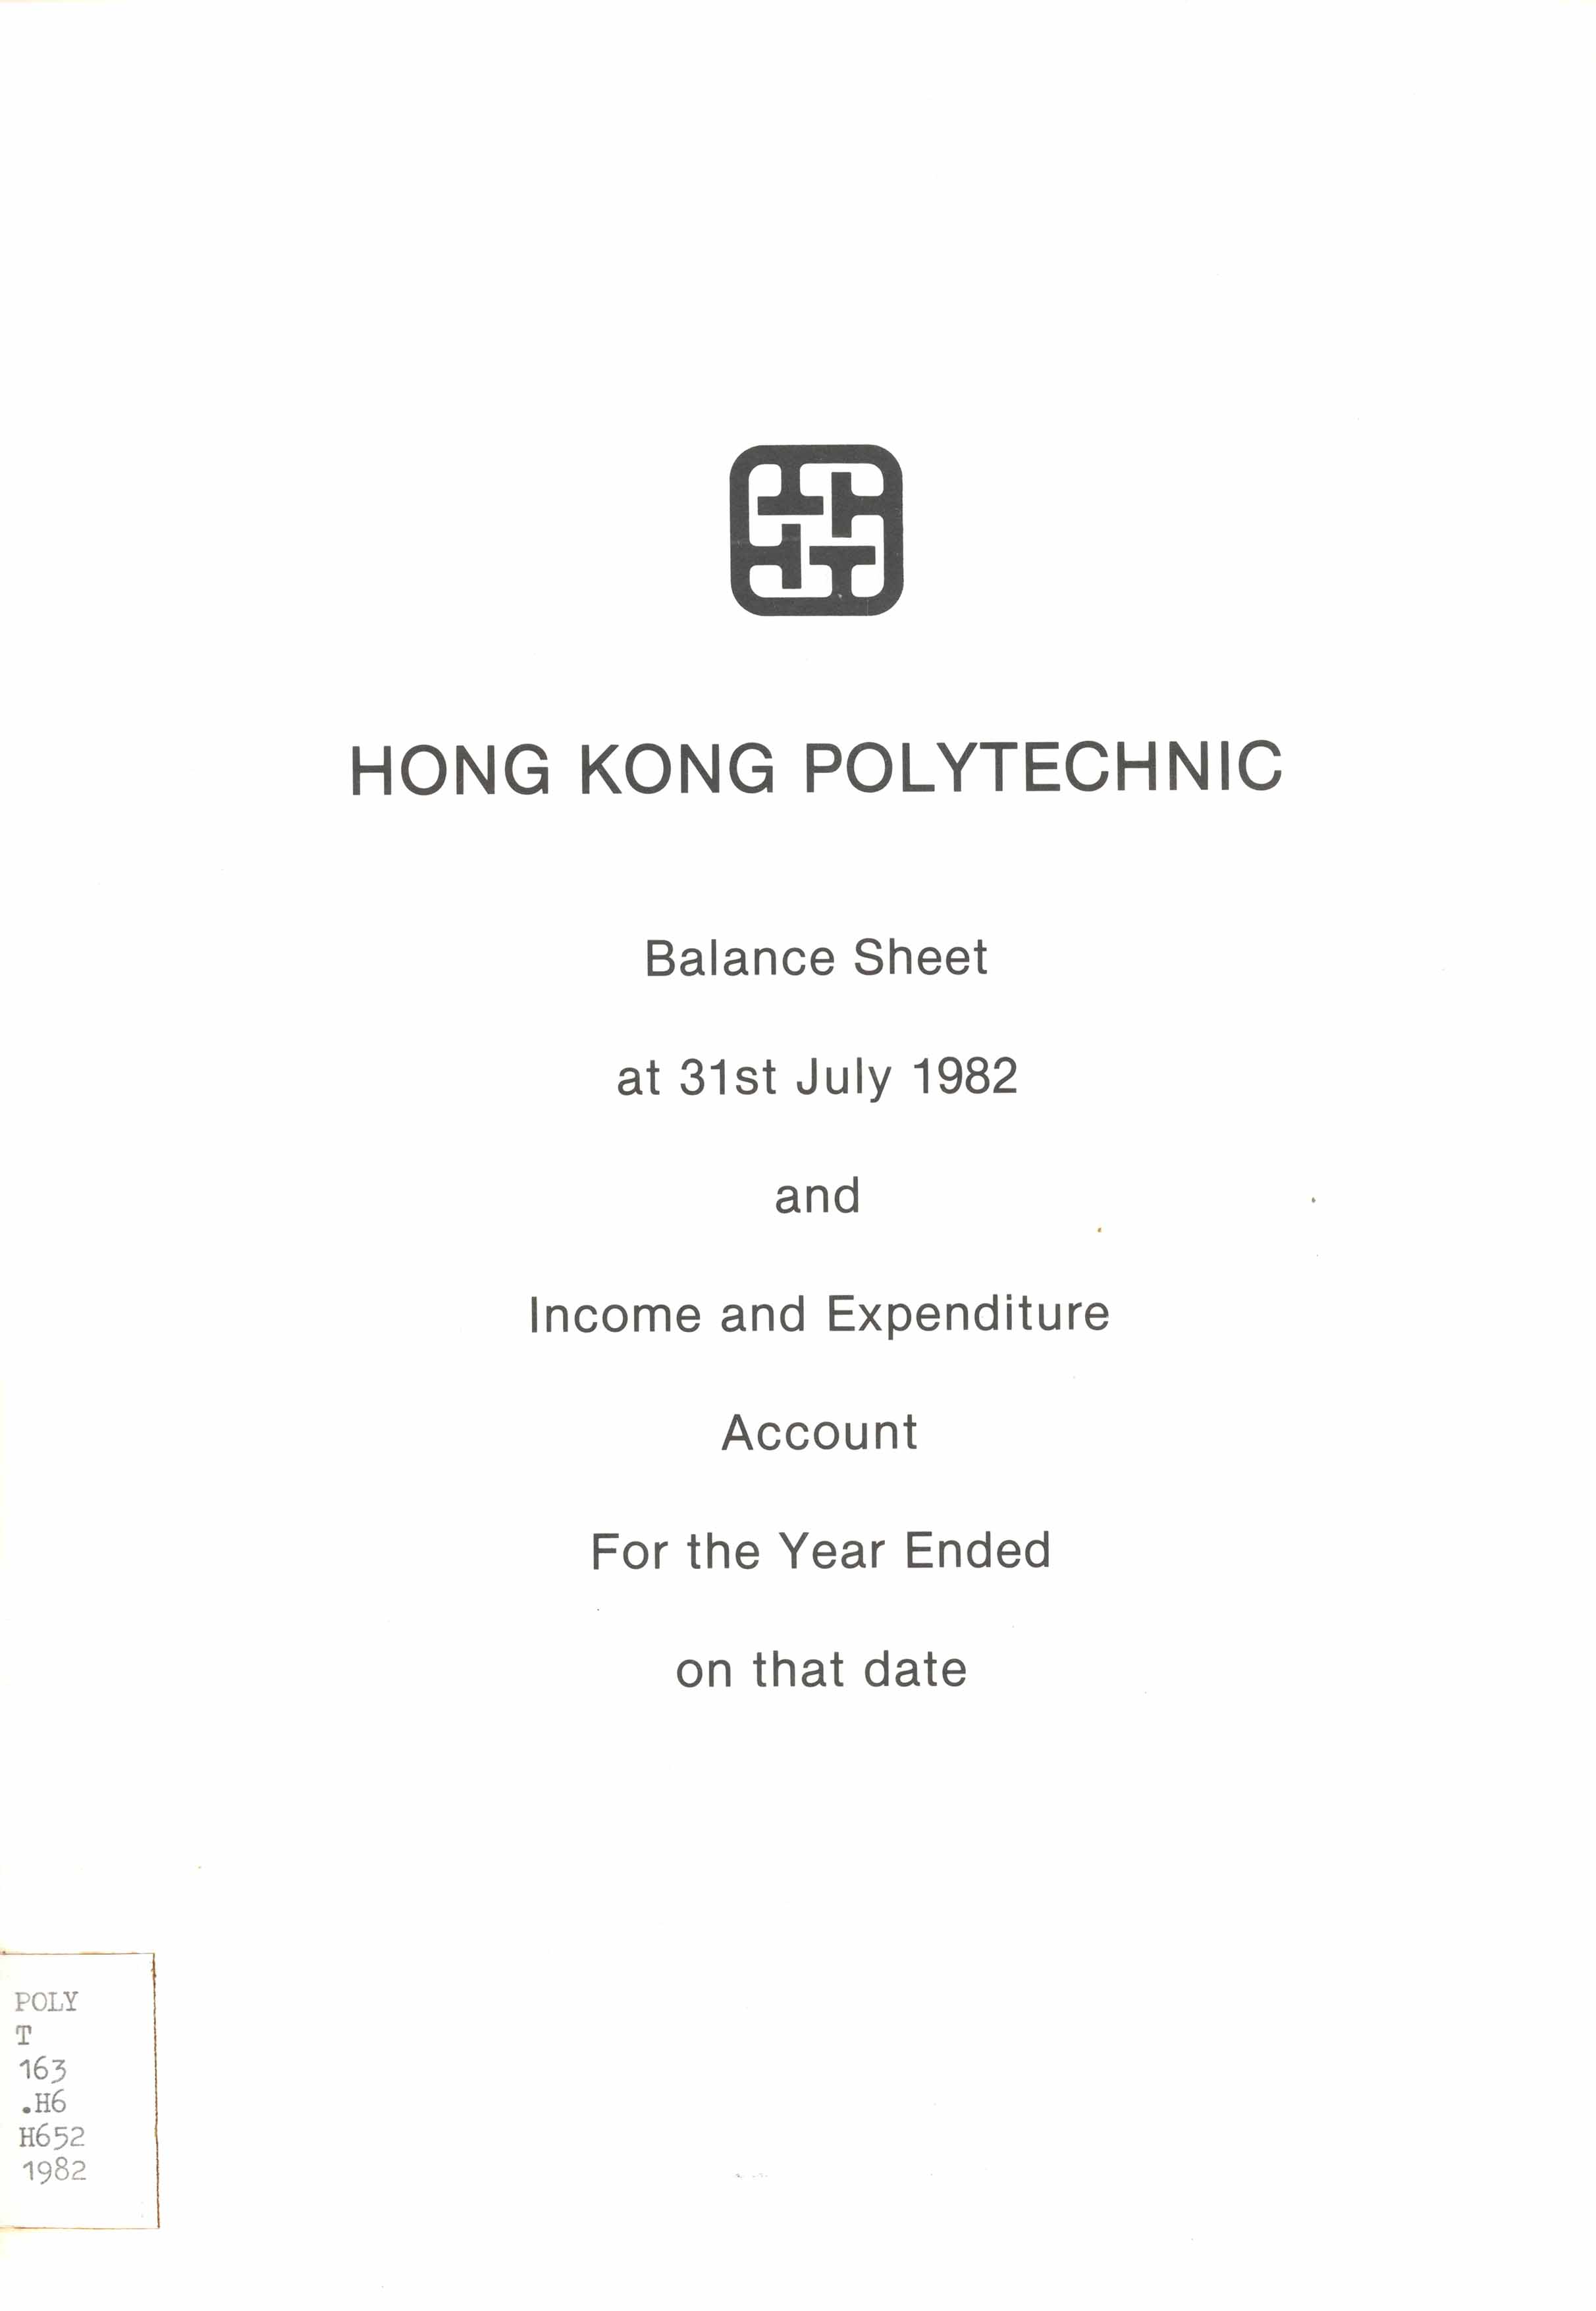 Balance sheet at 31st July 1982 and income and expenditure account for the year ended on that date